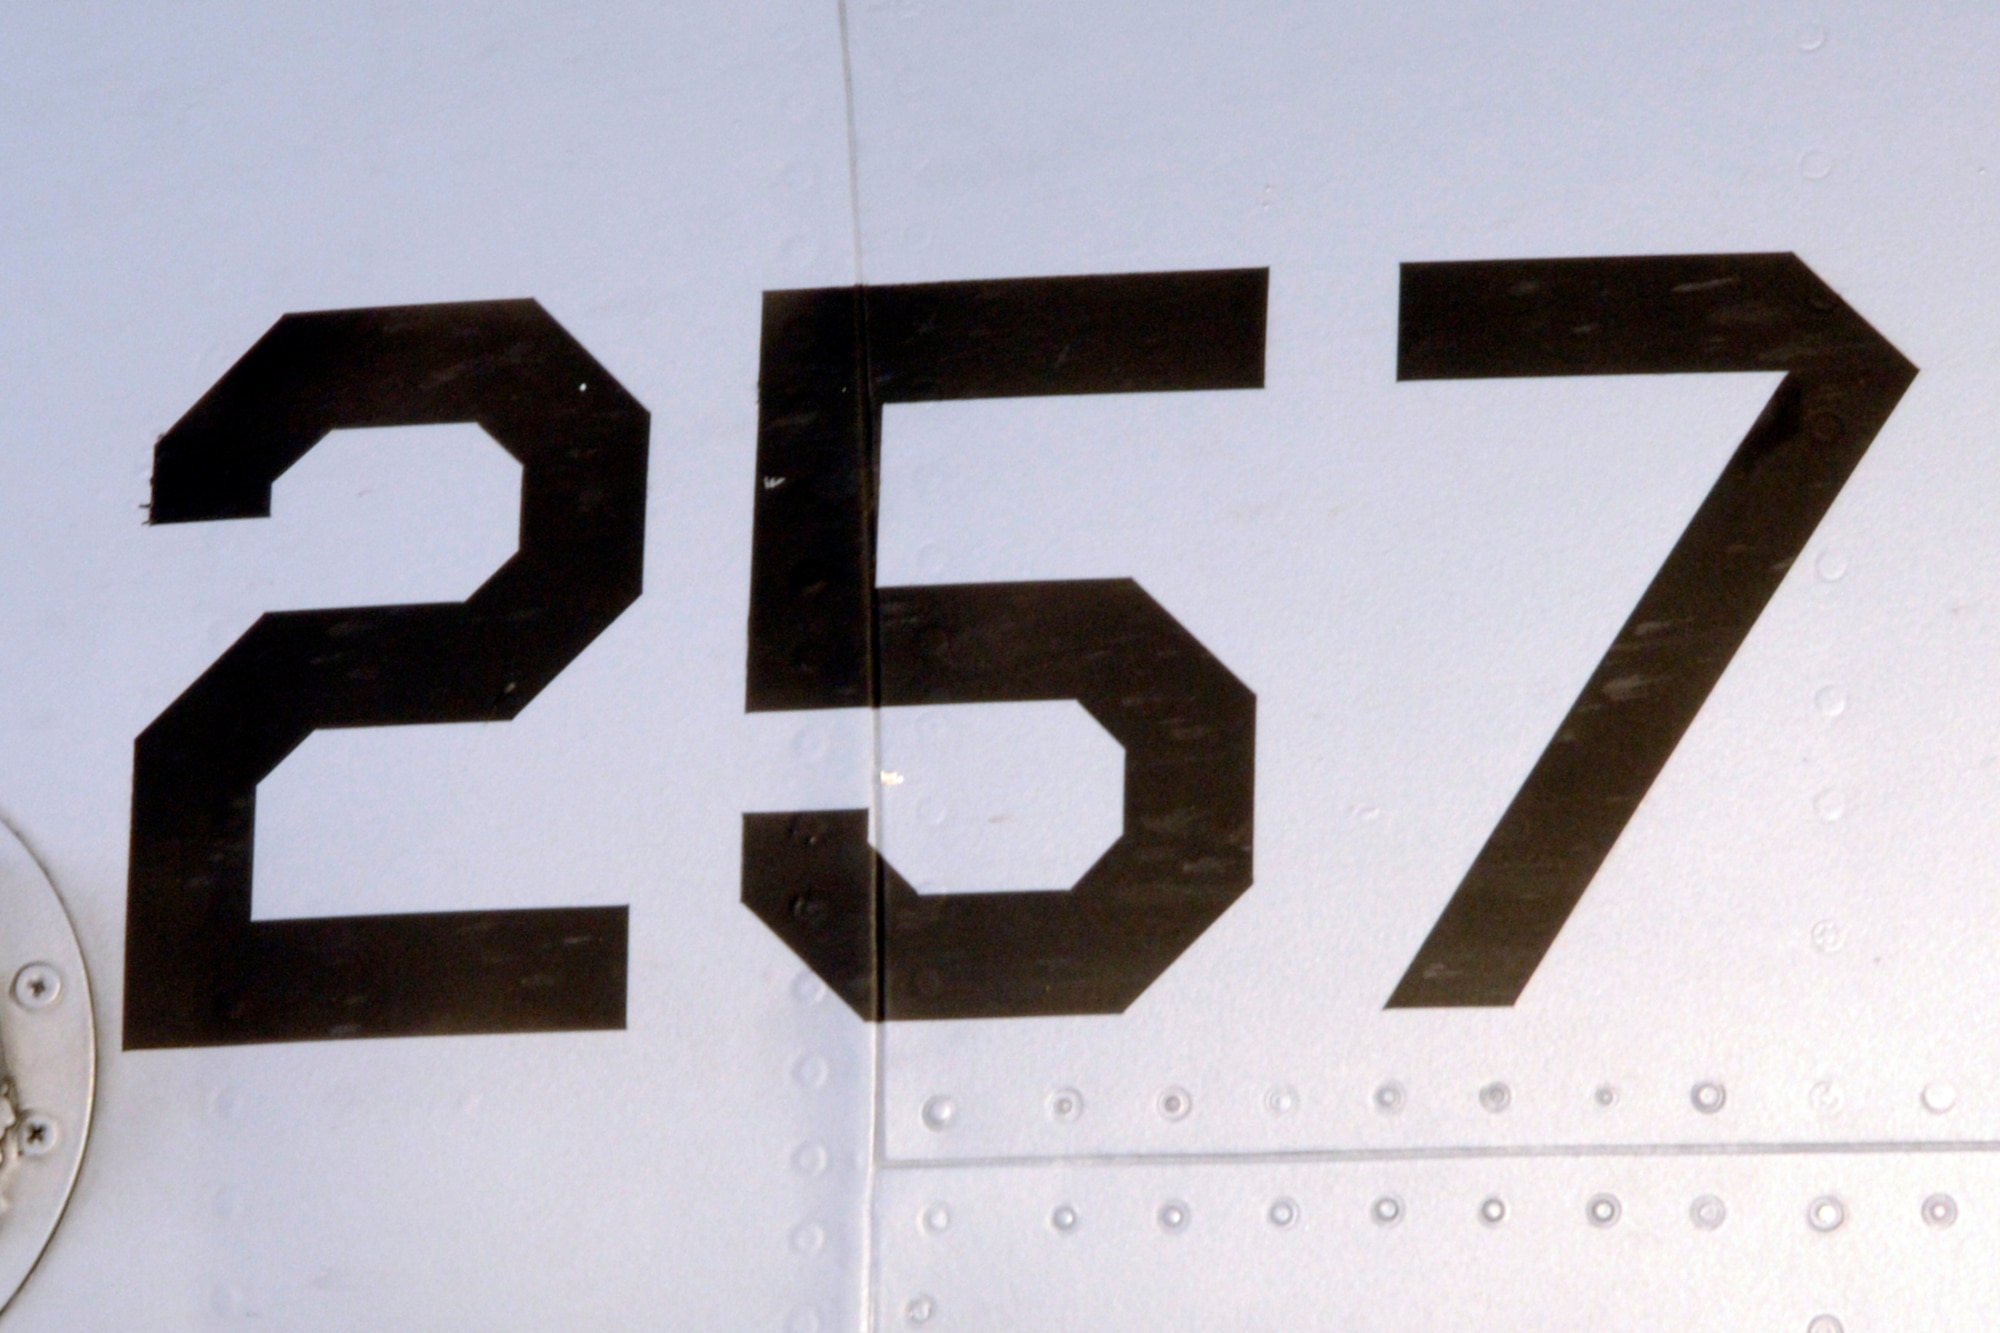 In addition to various unit markings, all military aircraft feature the aircraft’s tail number in several prominent locations, such as the 257 seen on this A-10 Thunderbolt II at Selfridge Air National Guard Base, Mich. The tail number is unique to each aircraft and allows each aircraft to be tracked by maintenance and other personnel. (Air National Guard photo by Brittani Baisden)